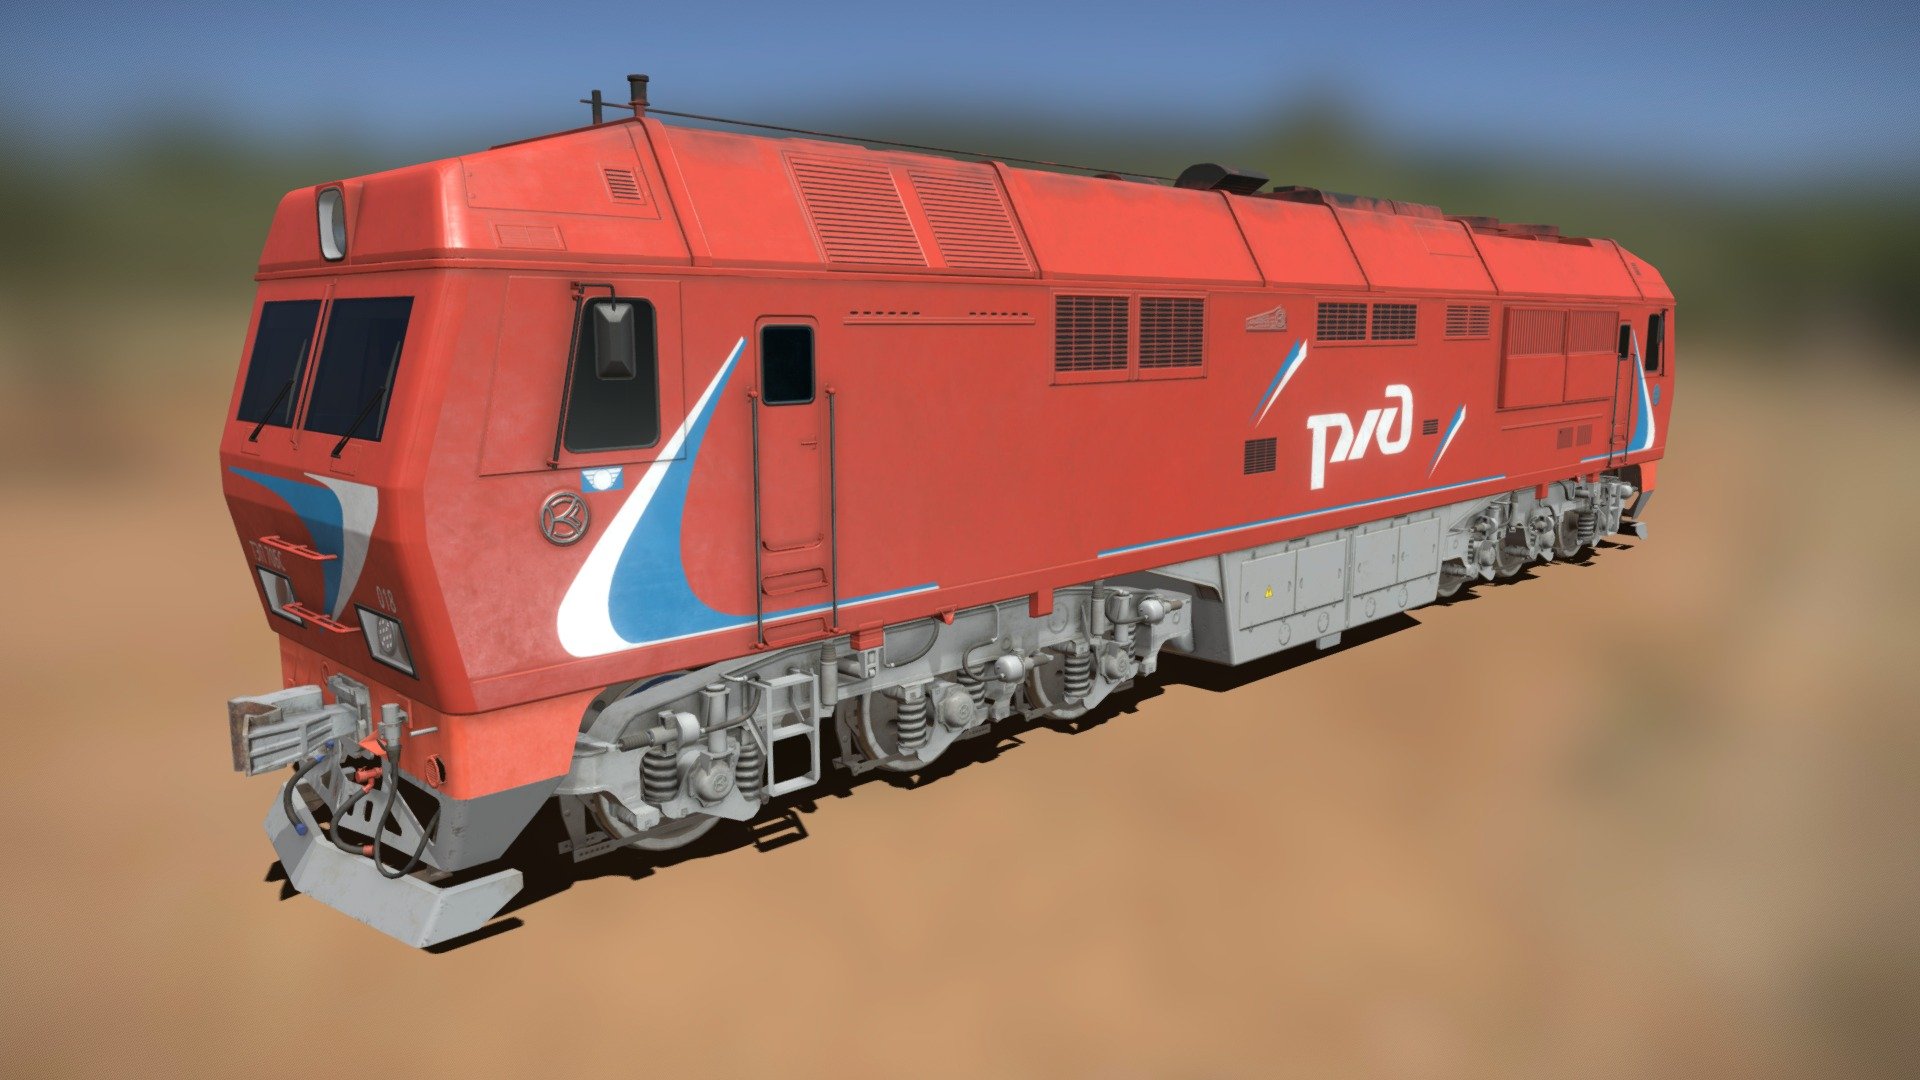 Russian locomotive manufactured by Kolomna Factory  between 1973 and 2006. TEP70 series, model 018.
Modeled for railway simulator in Maya, textured in Substance Painter 3d model